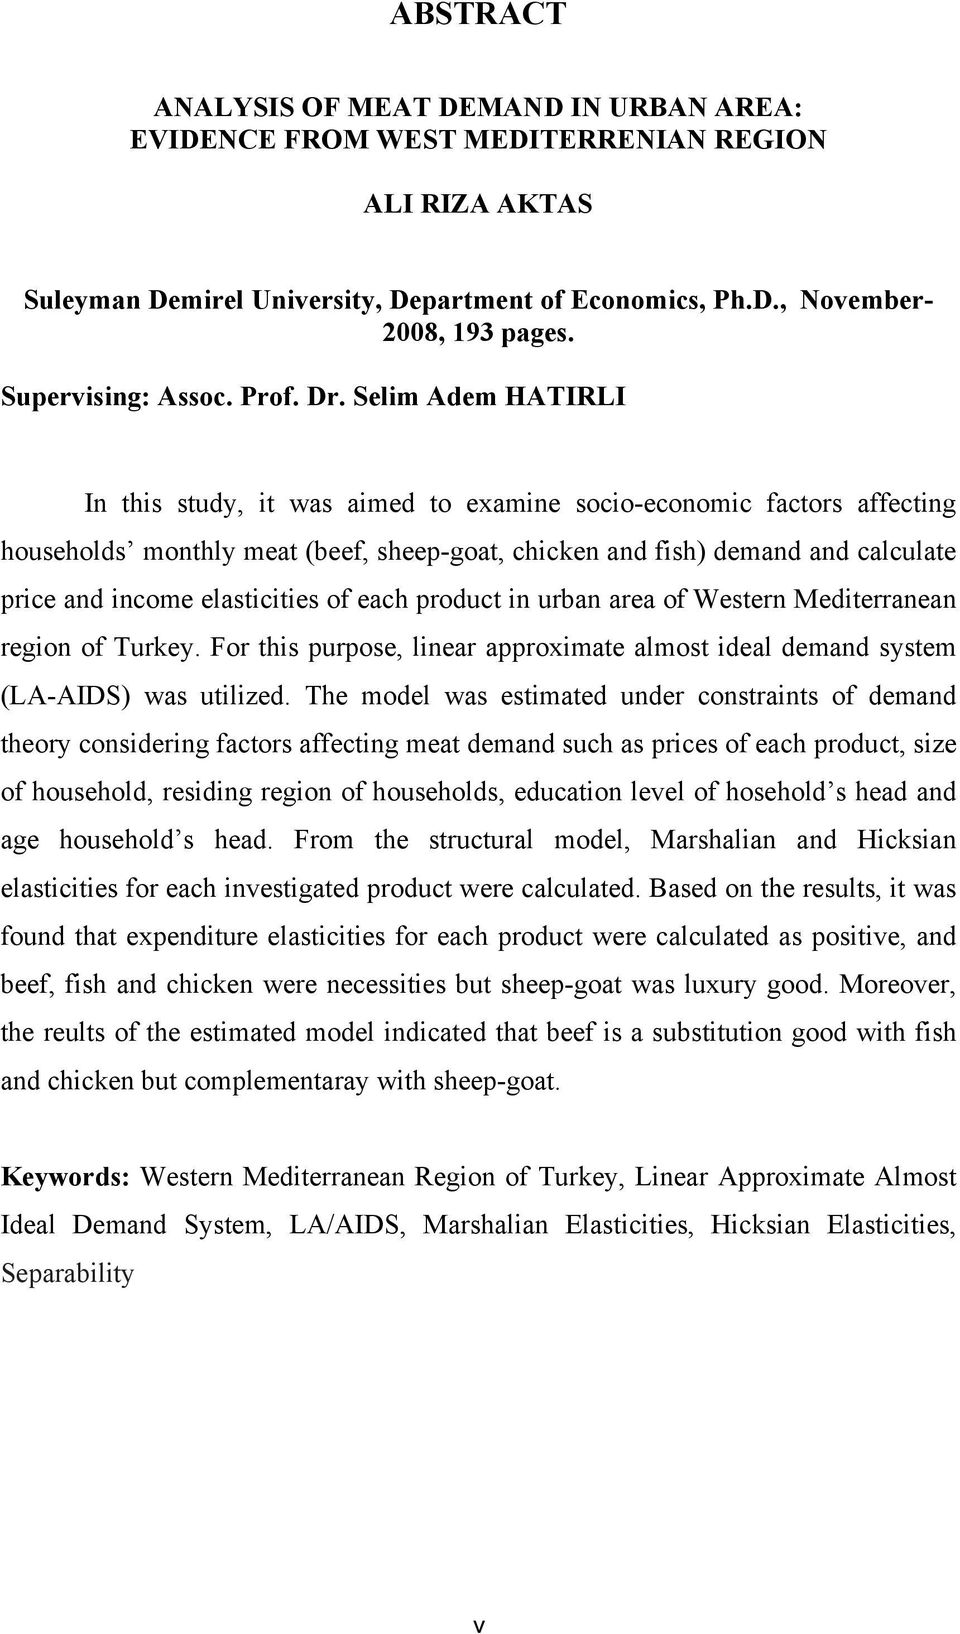 Selm Adem HATIRLI In ths study, t was amed to examne soco-economc factors affectng households monthly meat (beef, sheep-goat, chcken and fsh) demand and calculate prce and ncome elastctes of each